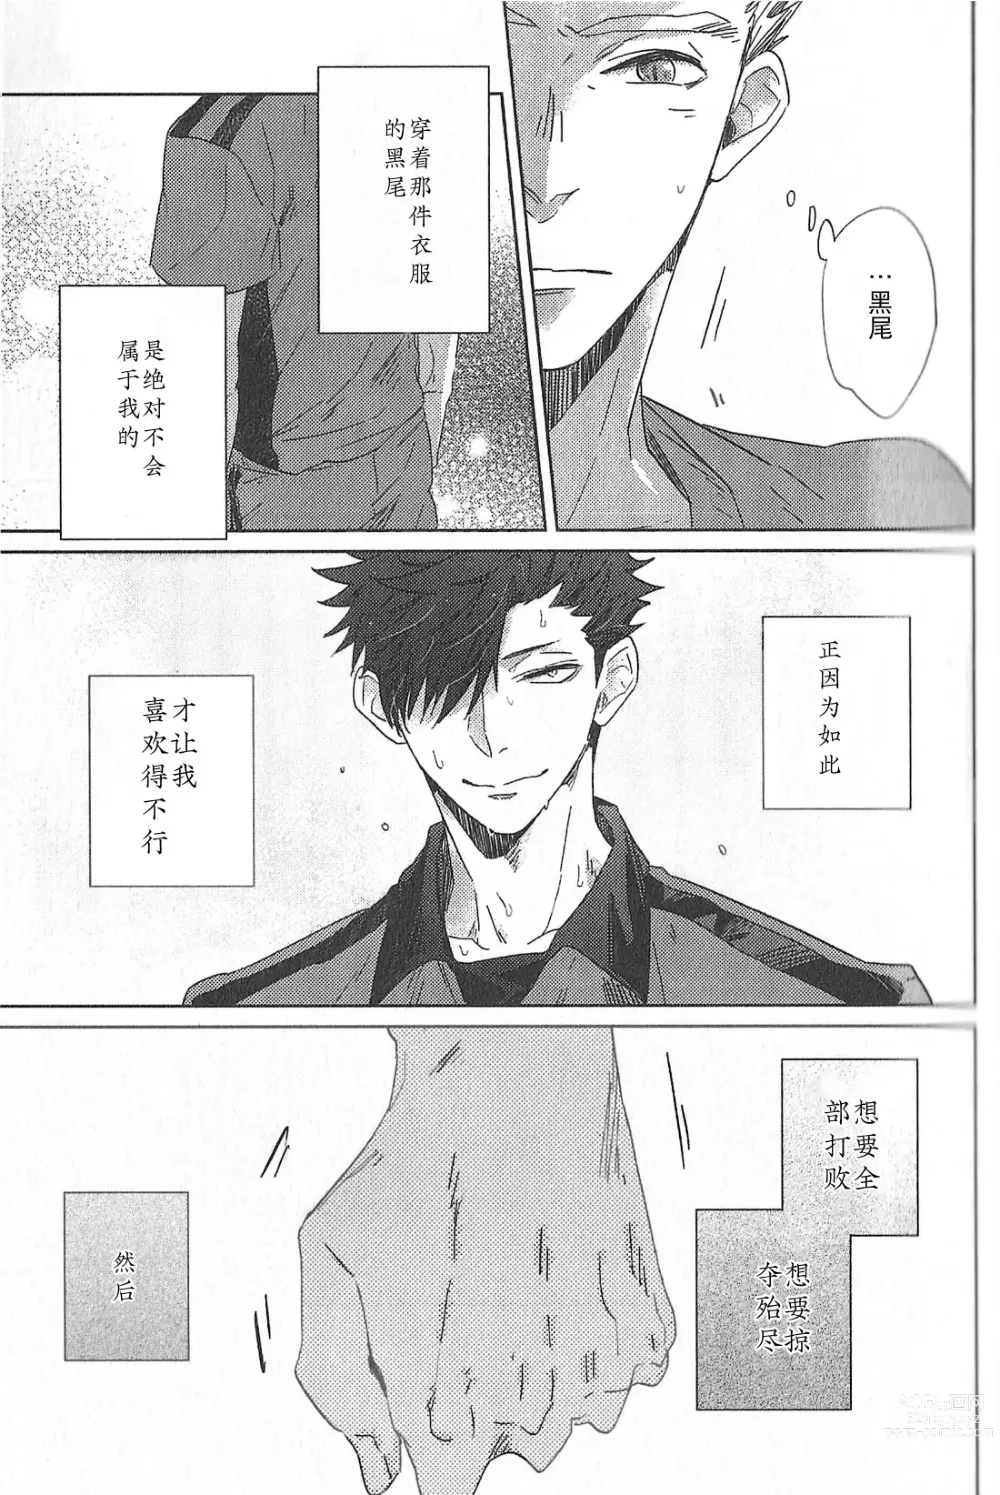 Page 24 of doujinshi 极境的野兽 前篇